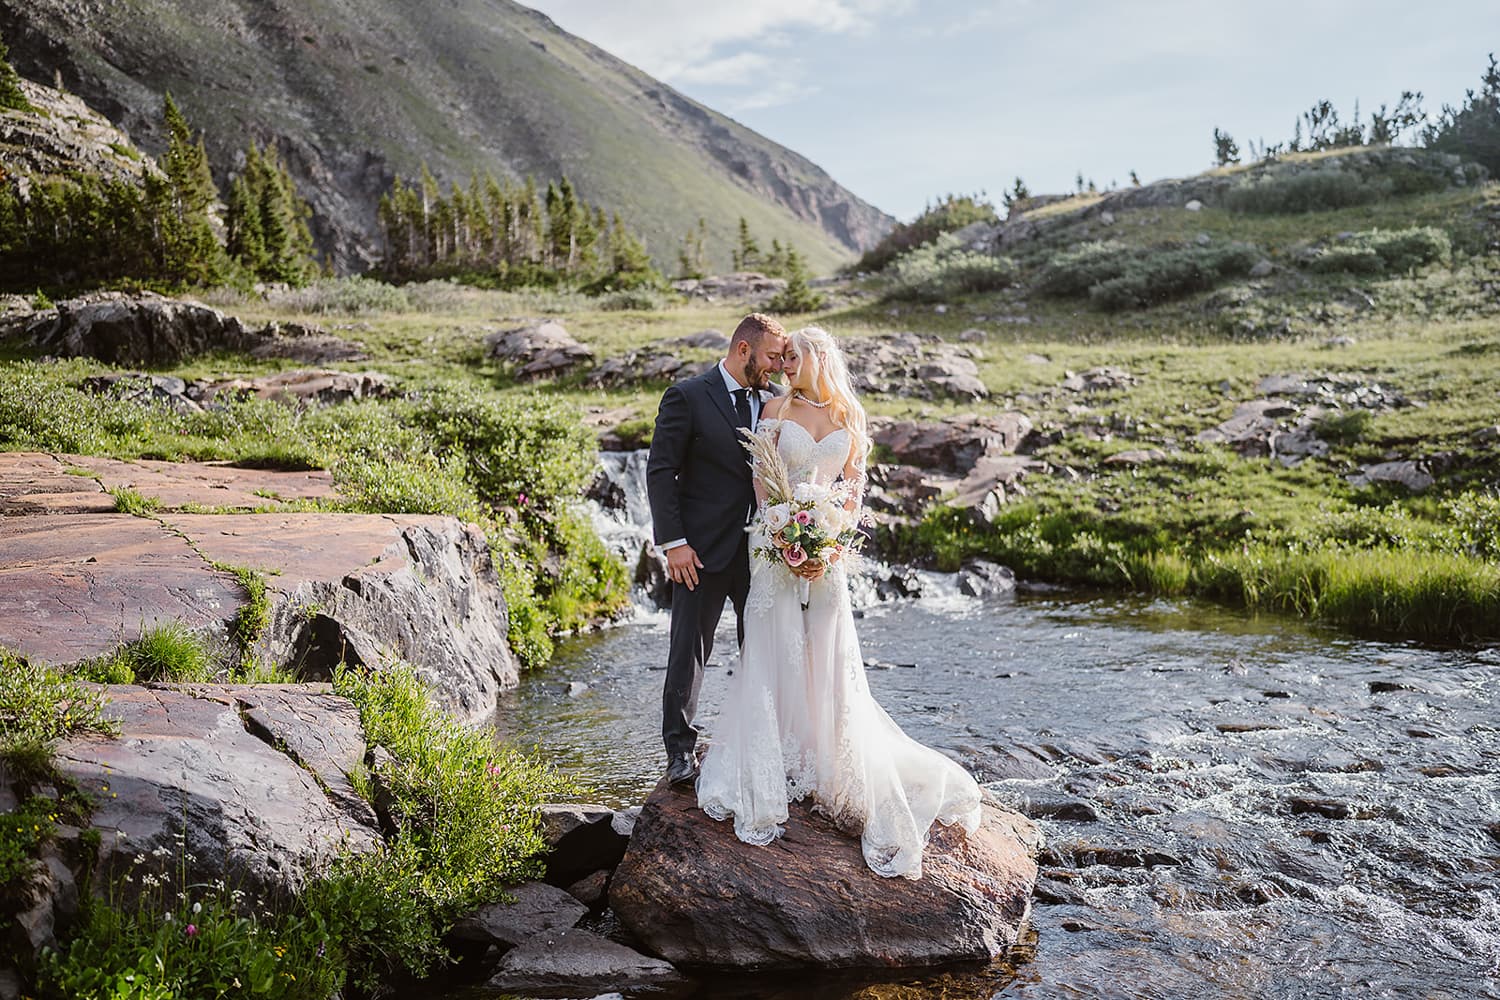 Couple standing on a rock near water for their Breckenridge elopement.